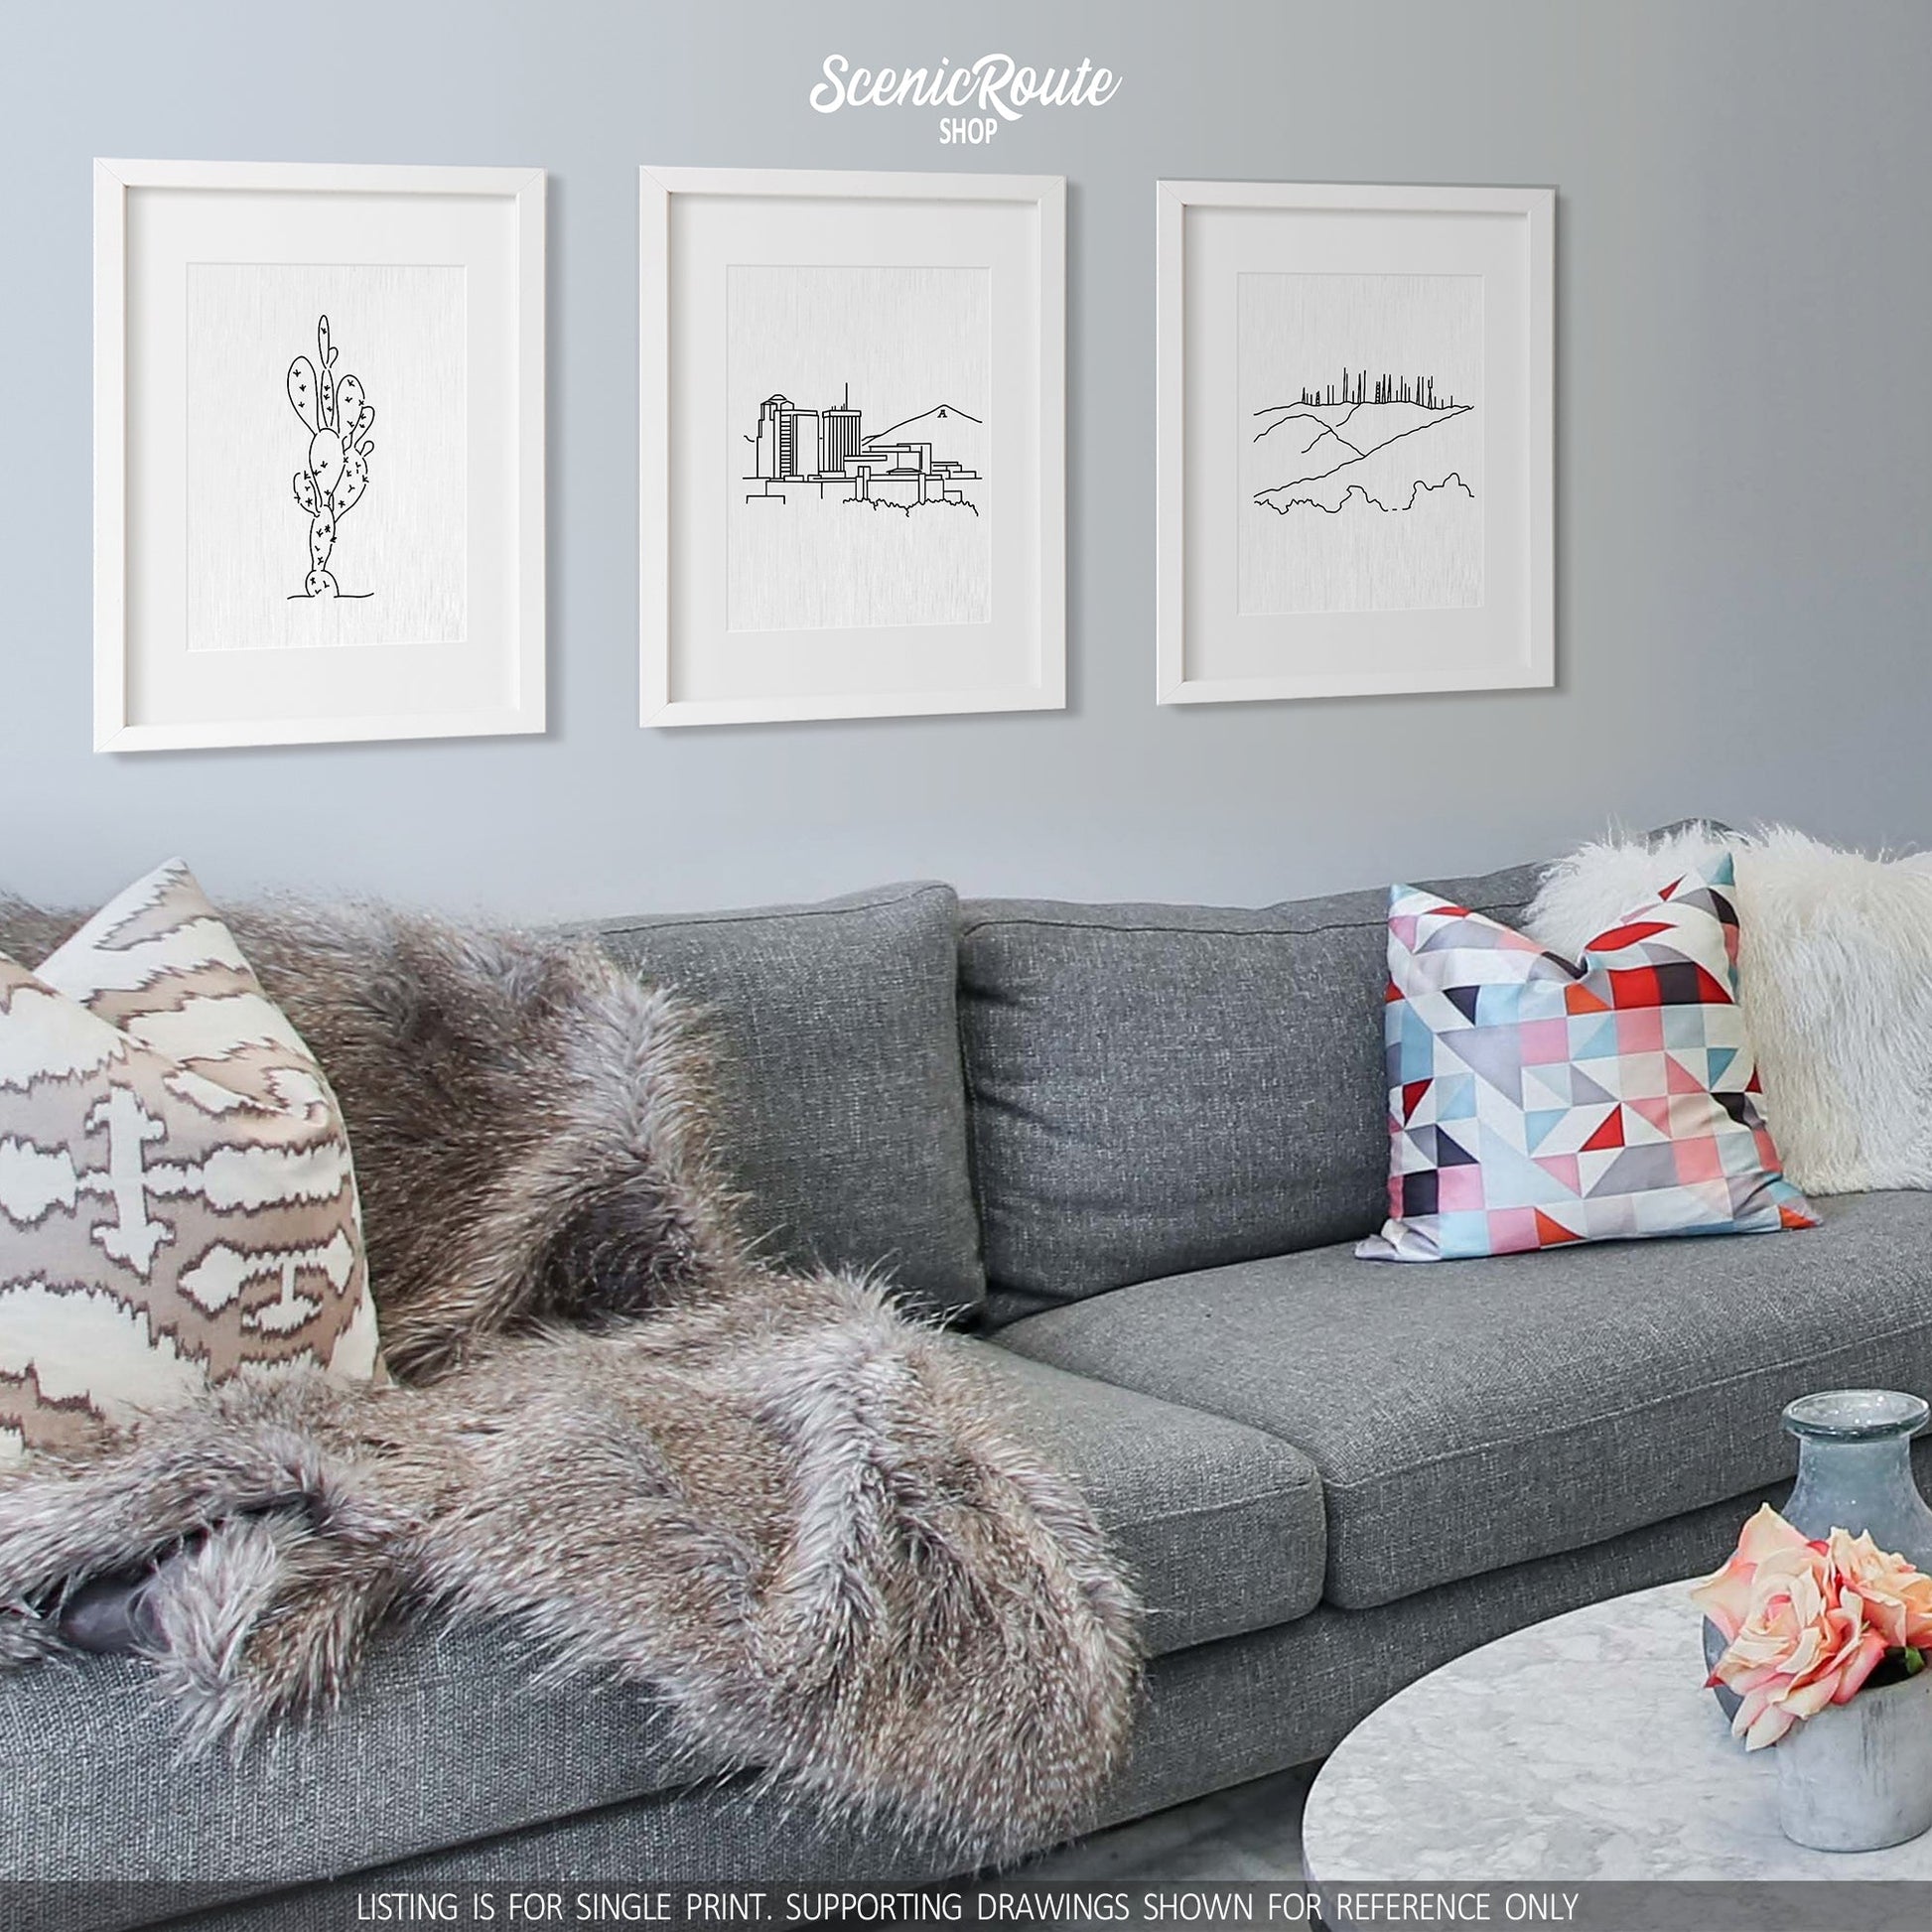 A group of three framed drawings on a white wall hanging above a couch with pillows and a blanket. The line art drawings include a Prickly Pear Cactus, Tucson Skyline, and South Mountain